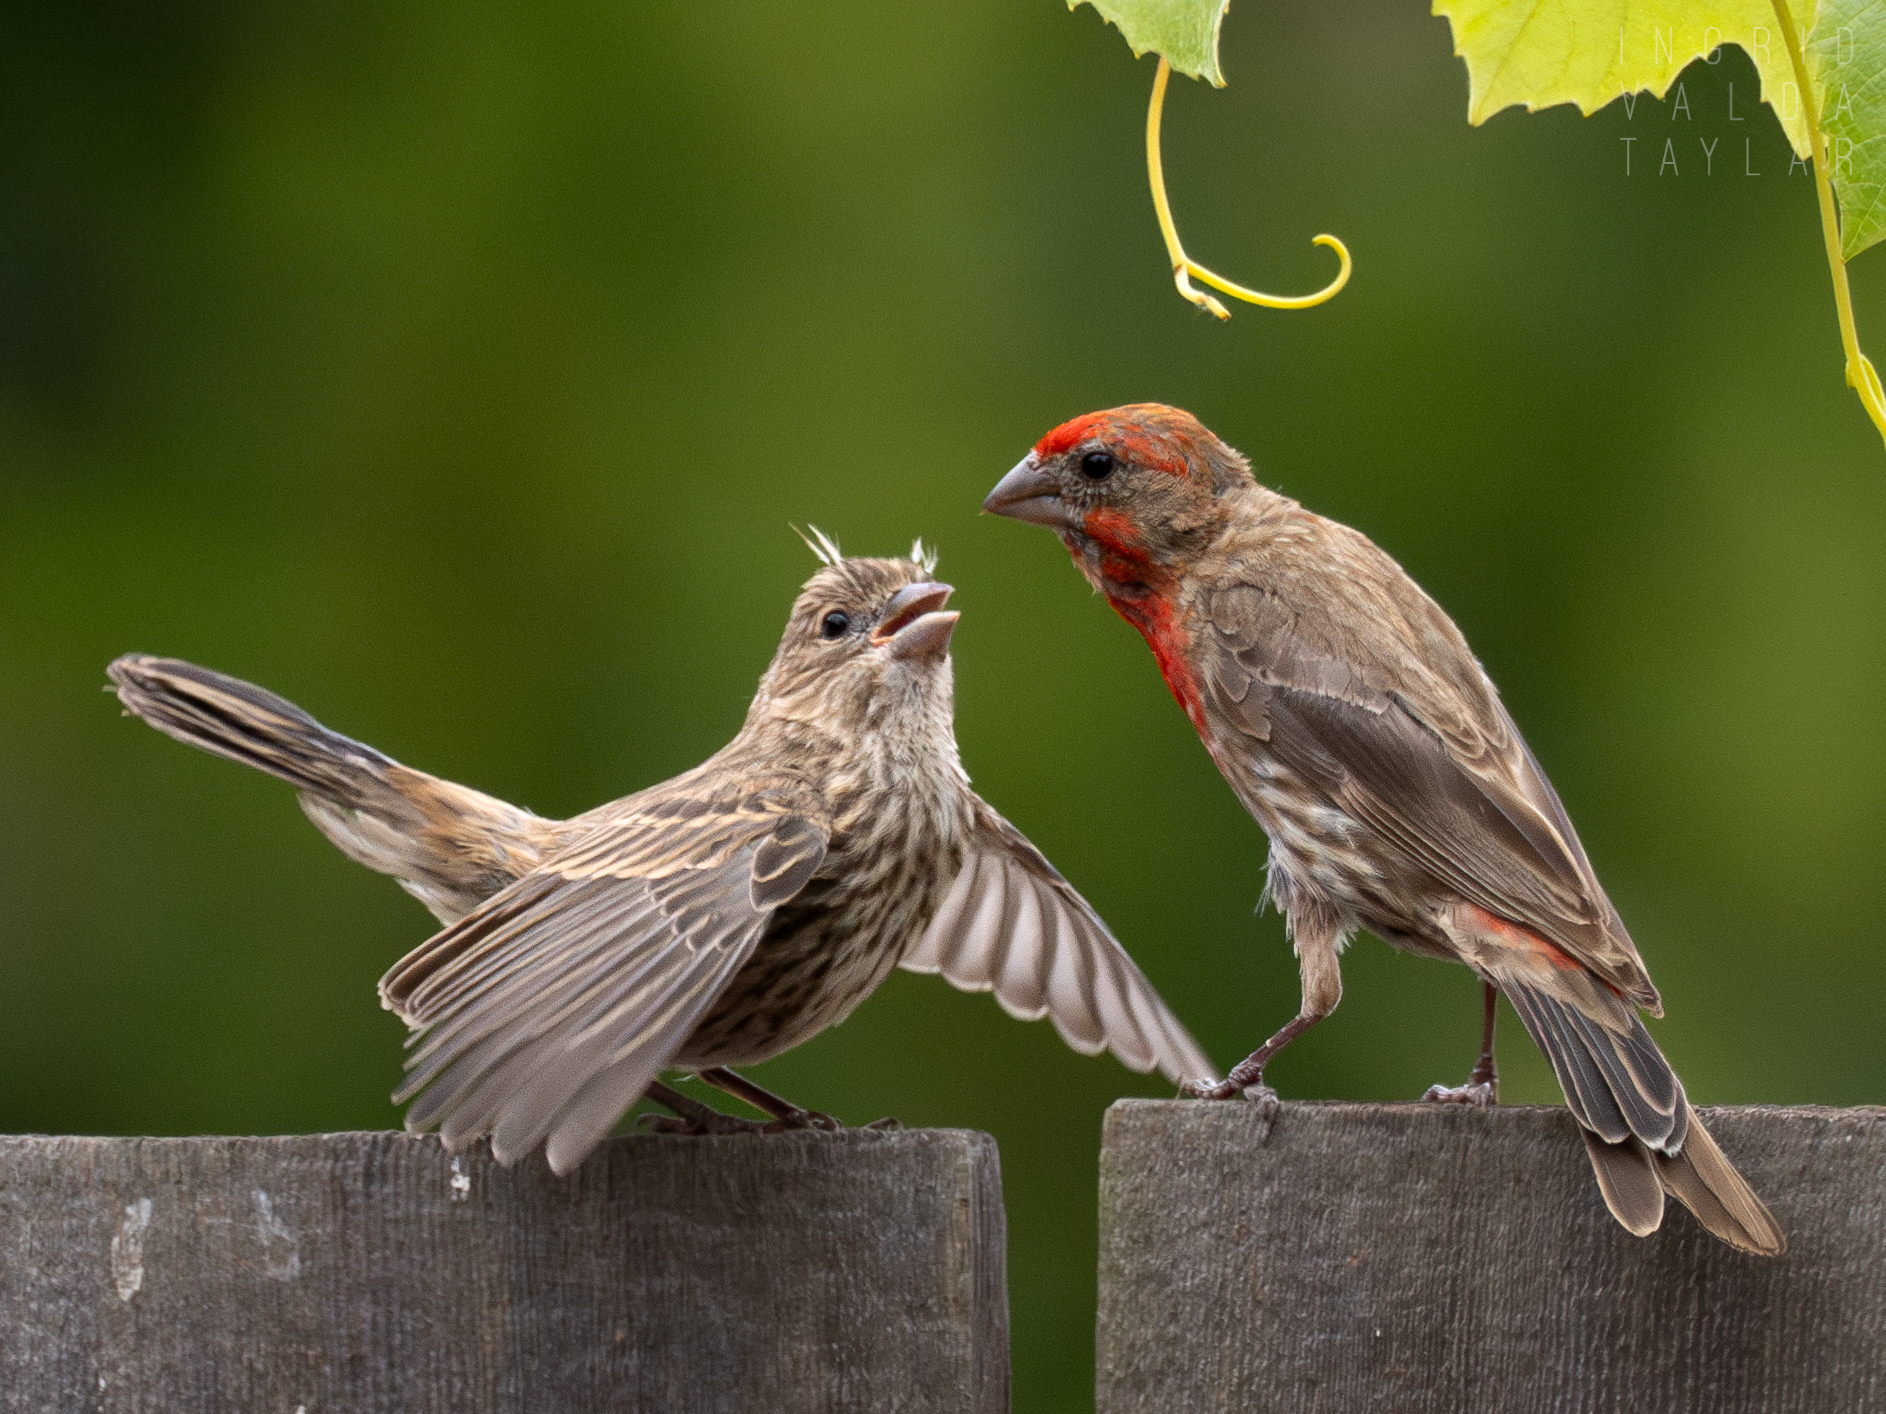 Male House Finch Feeding Juvenile Finch on Fence